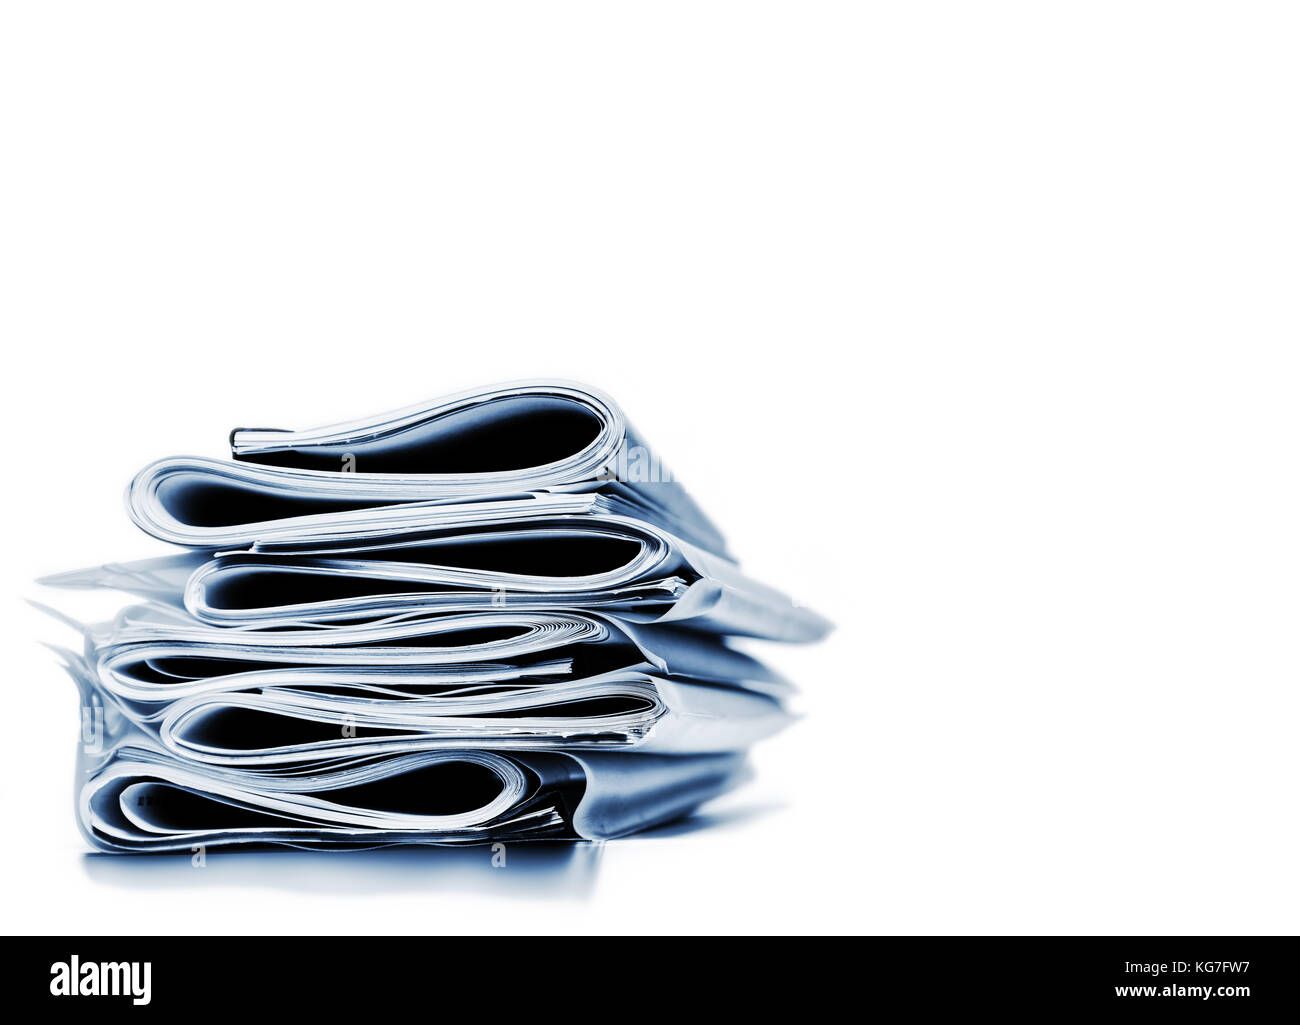 Stack of folded business, legal or insurance papers Stock Photo